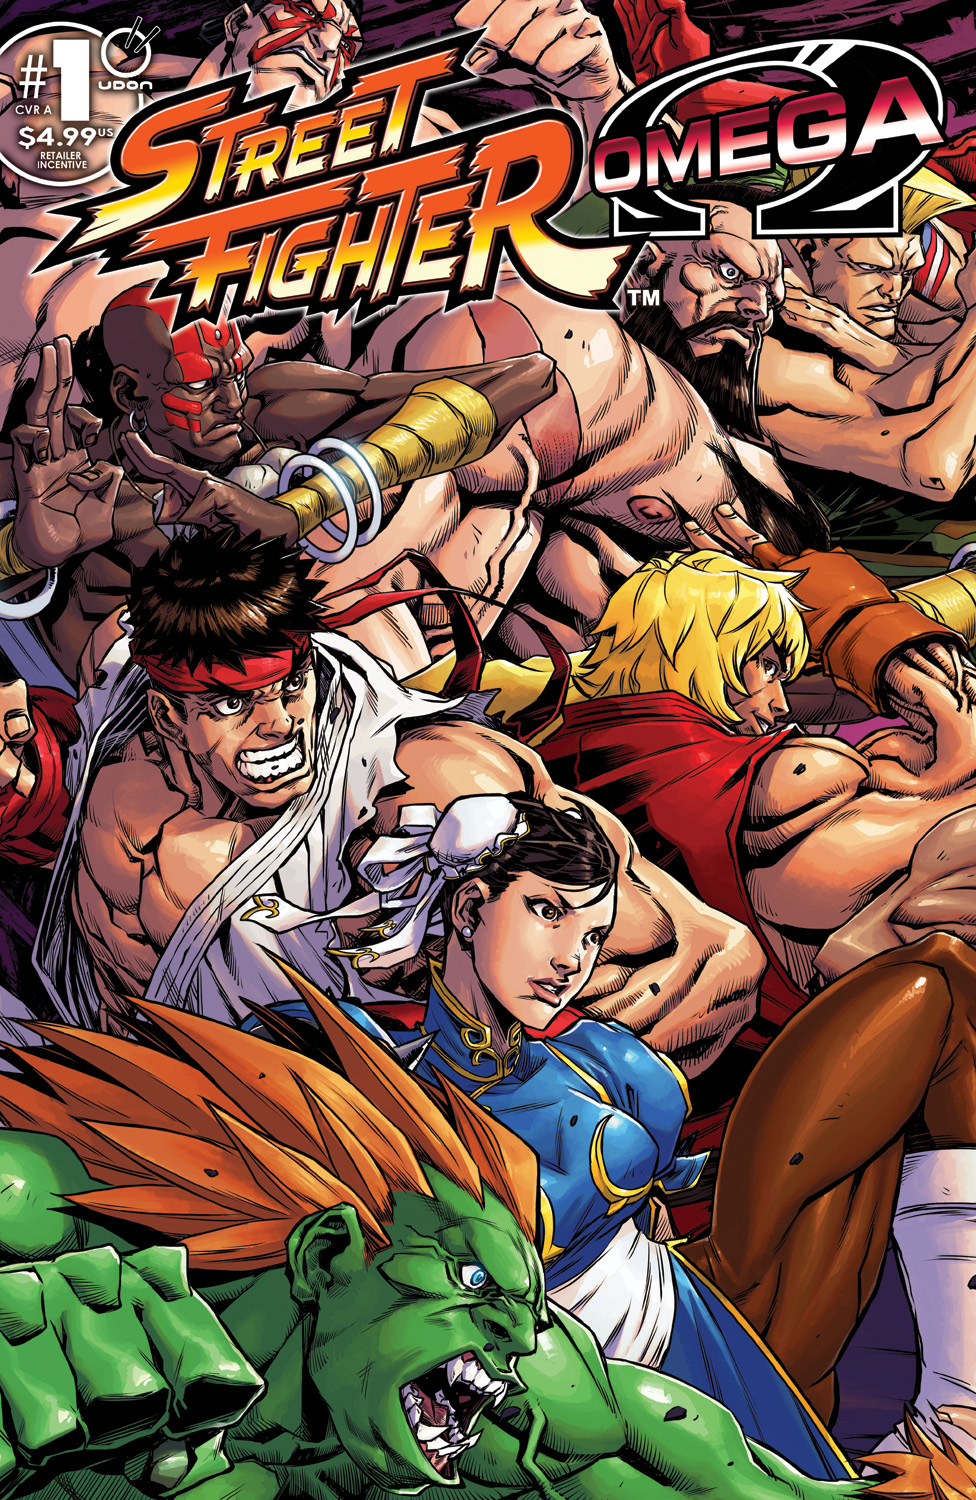 Street Fighter 6 Deluxe Edition with Free Udon Comic, PlayStation 5